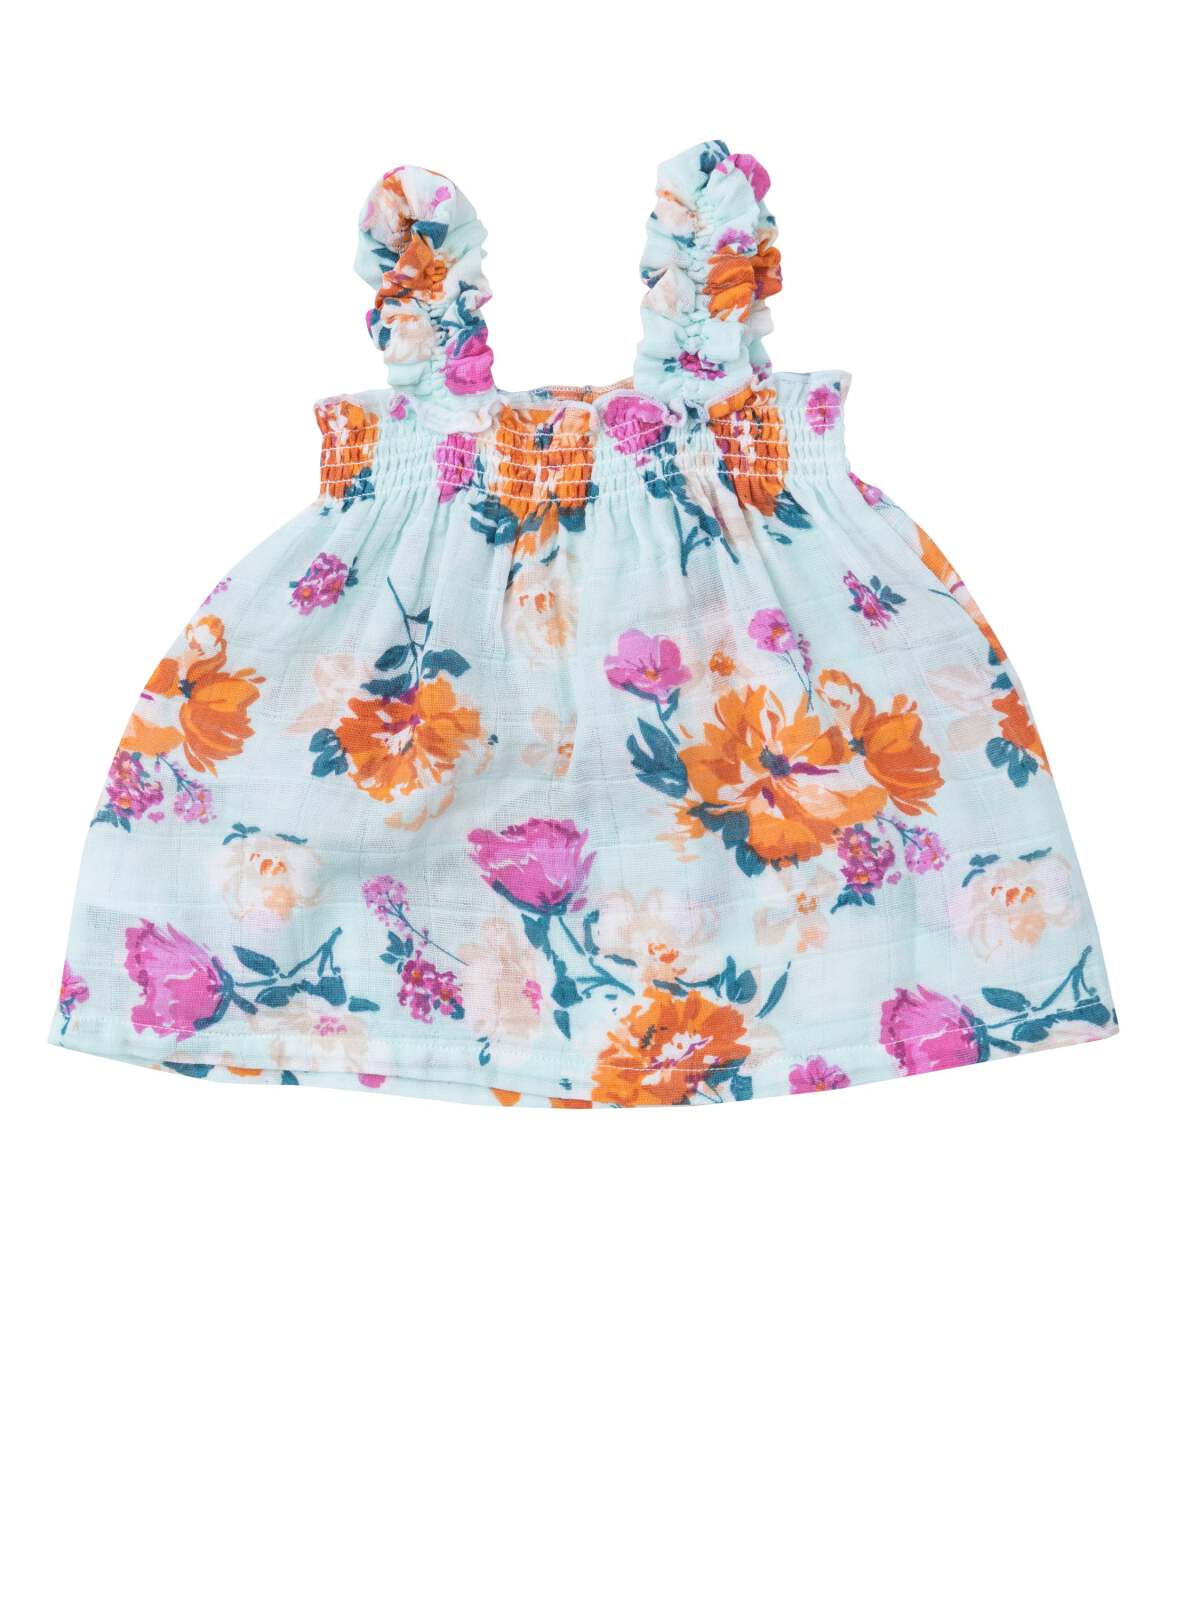 Ruffly Strap Top & Bloomer, Soft Petals Floral